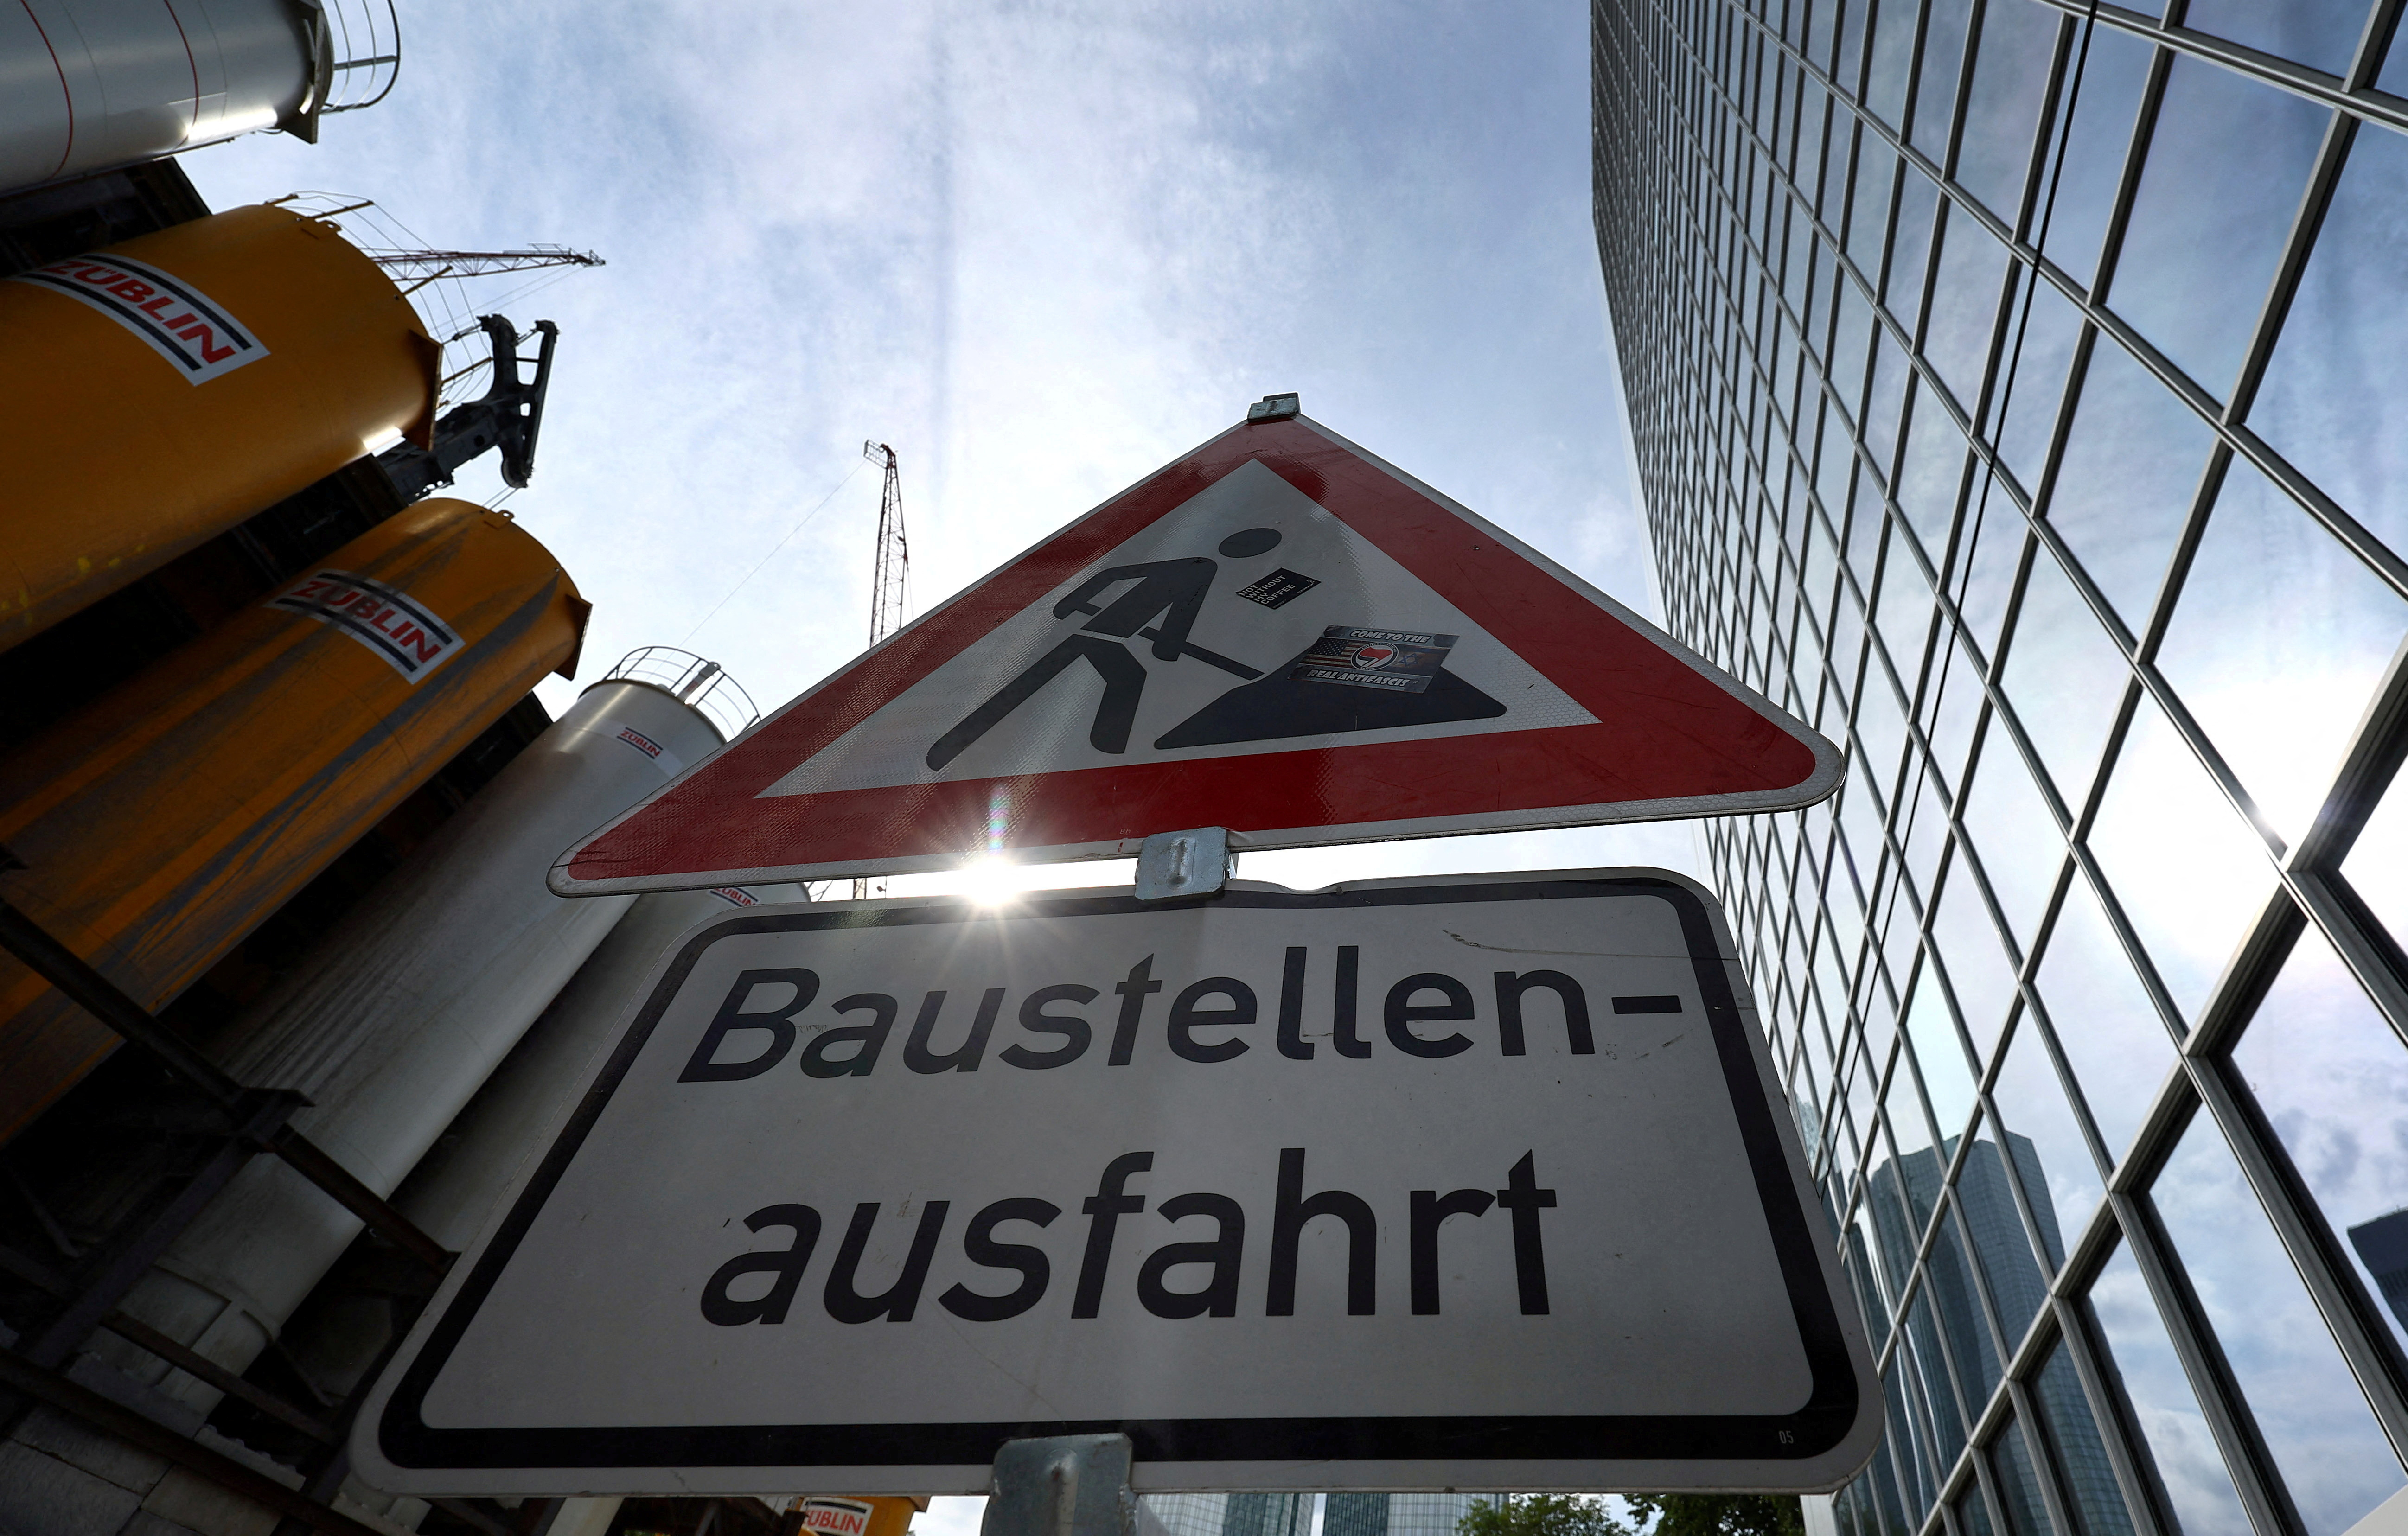 Baustelle (Construction Area) German - Wall Sign